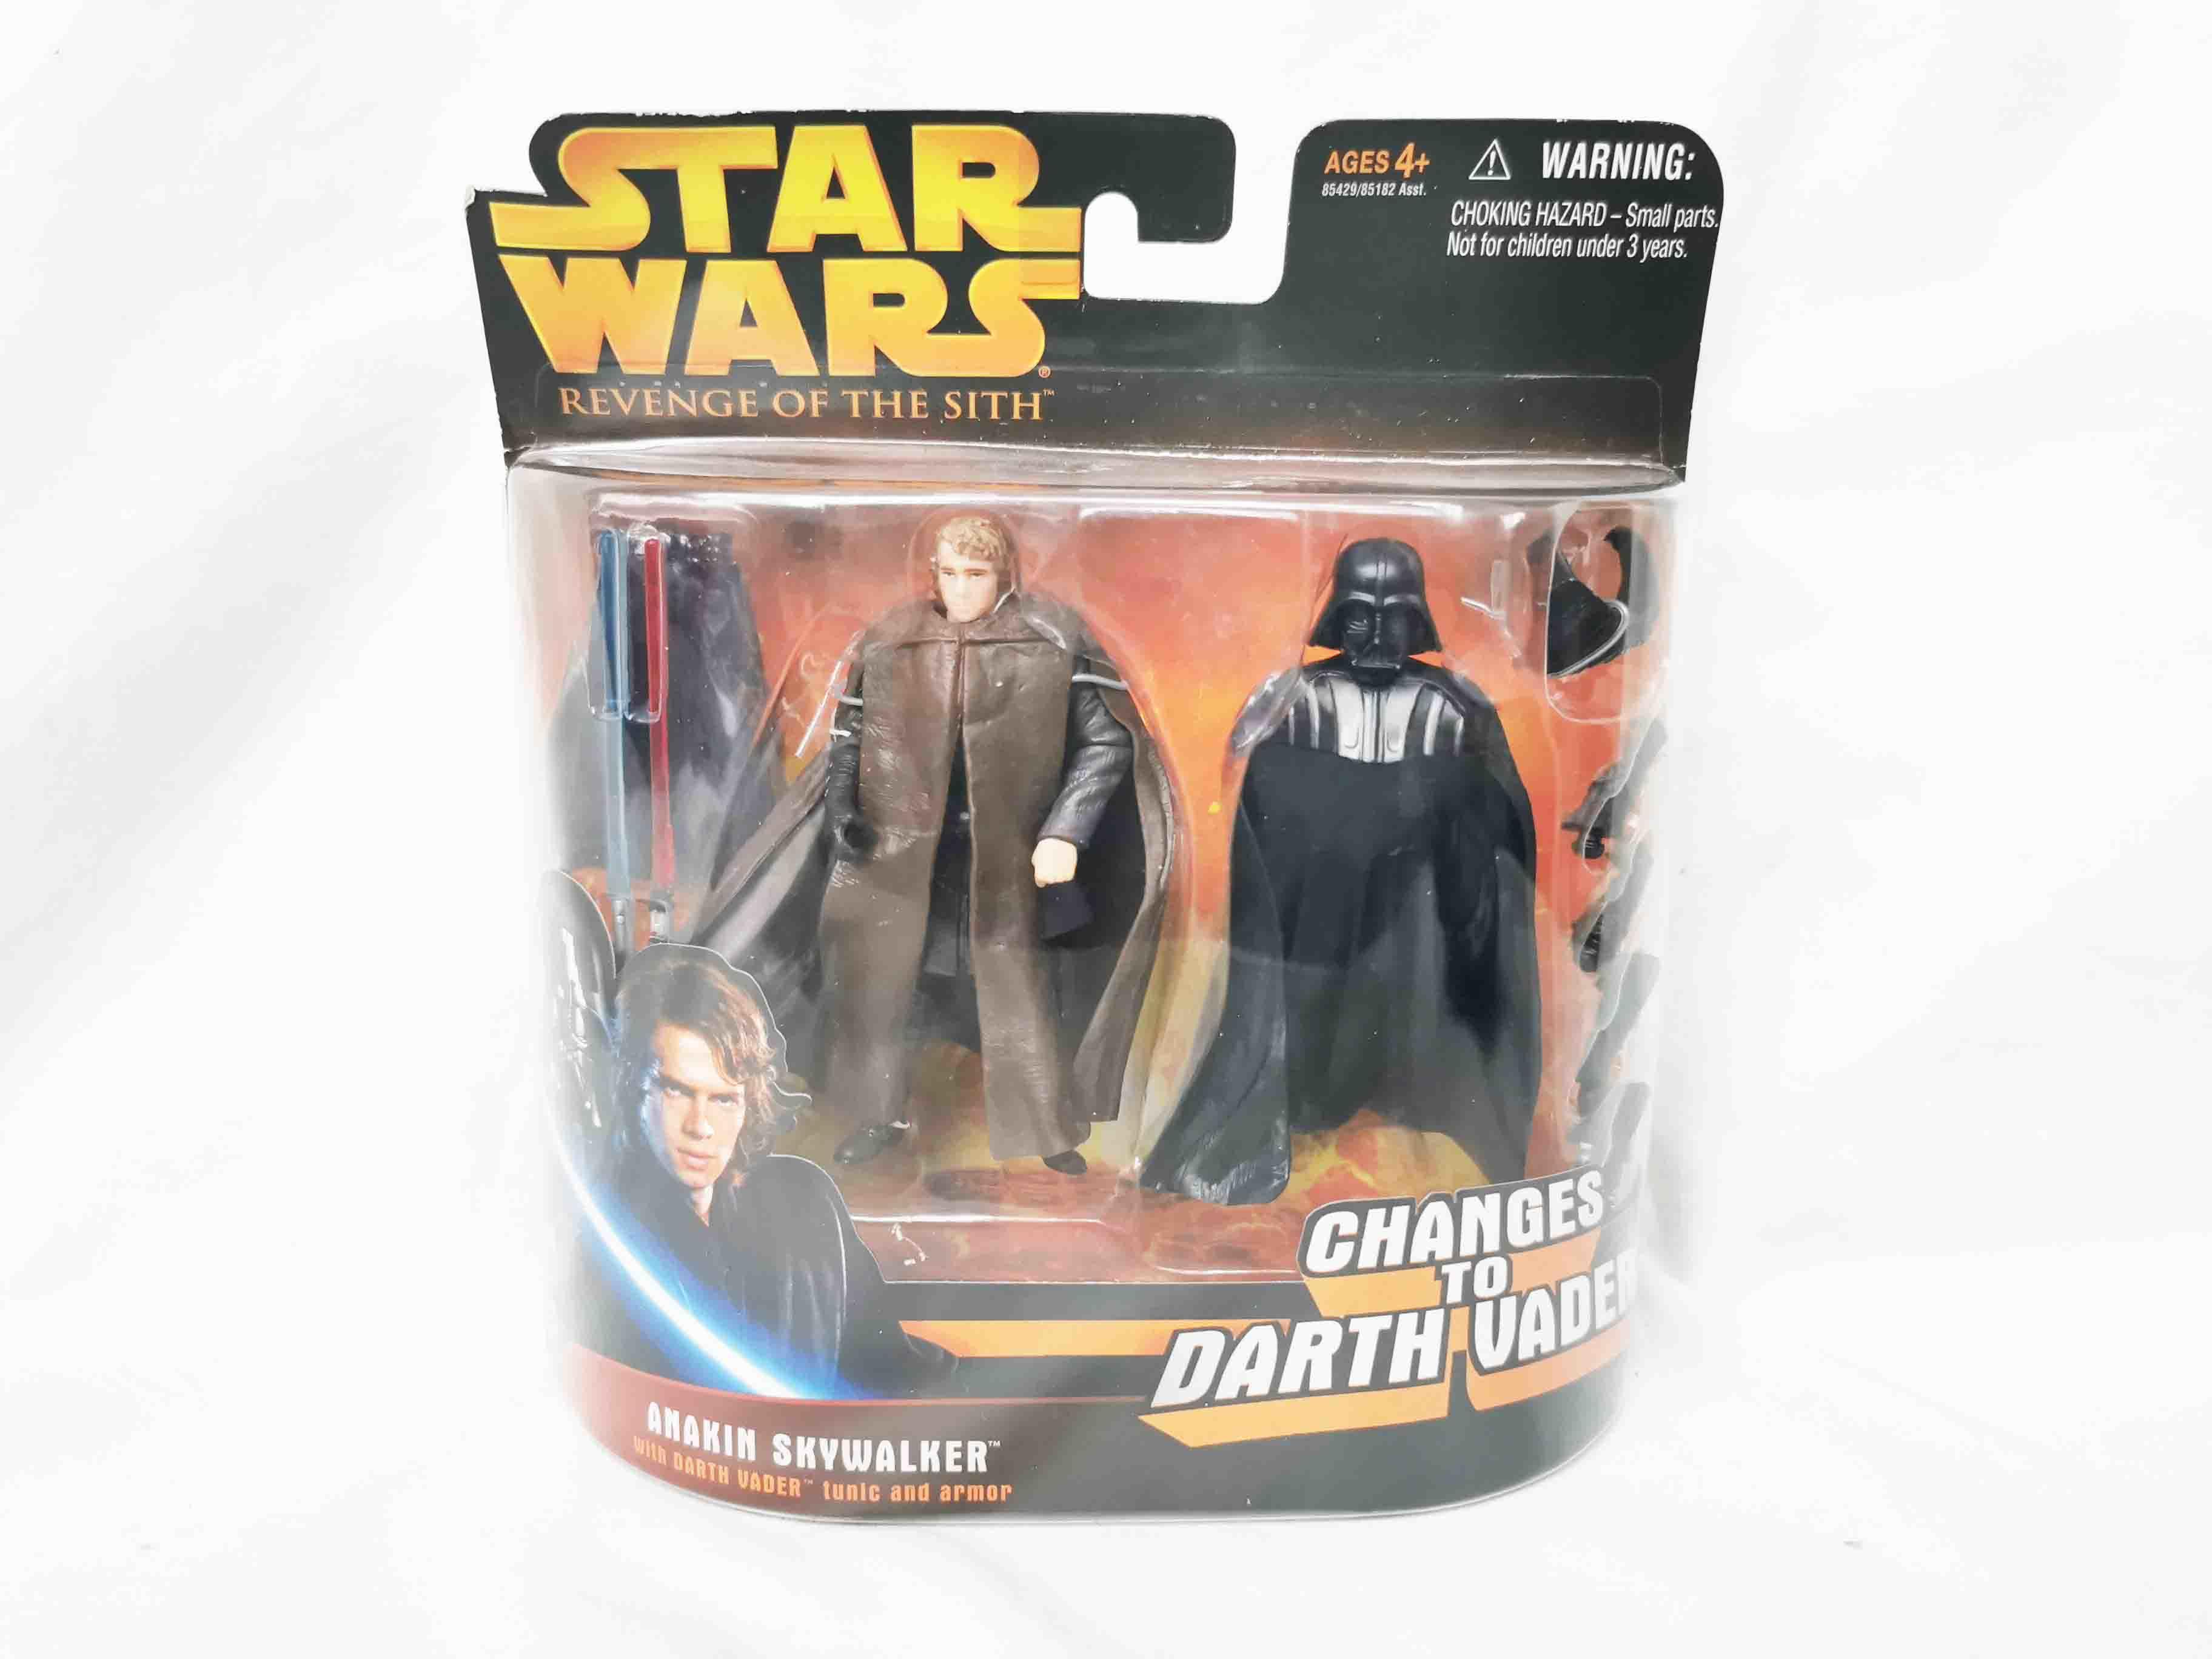 Star Wars Anakin Changes to Darth Vader Revenge of The Sith Action Figure 3.75”